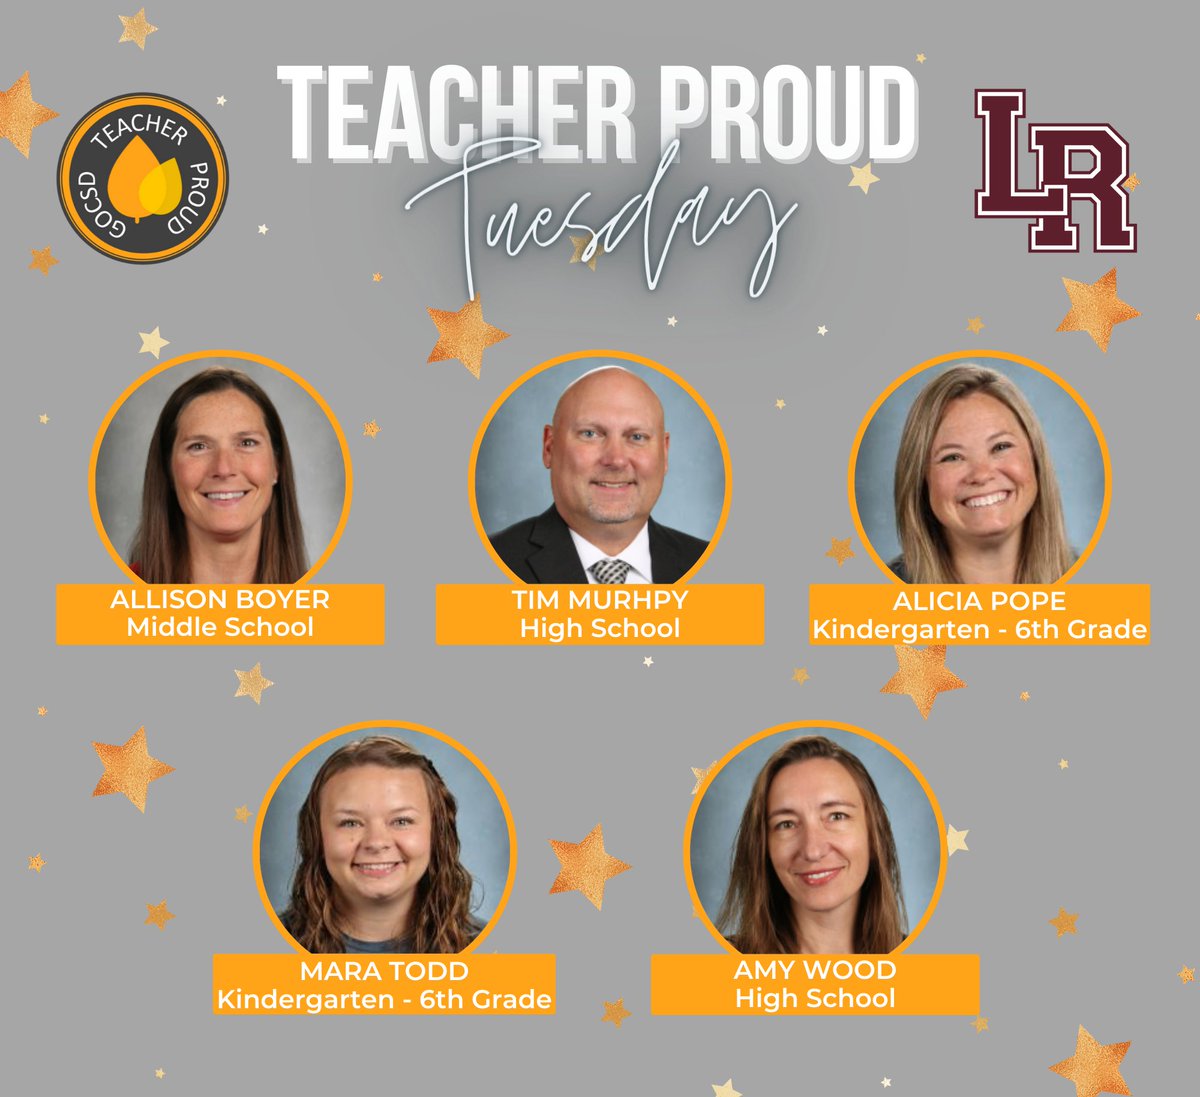 It's TPT! This month, we want to recognize the dedicated educators who organize our Summer School programs! Thank you for you additional efforts in ensuring our students can engage in continuous learning throughout the summer! #WeAreLR #TeacherProud @GOCSDMO